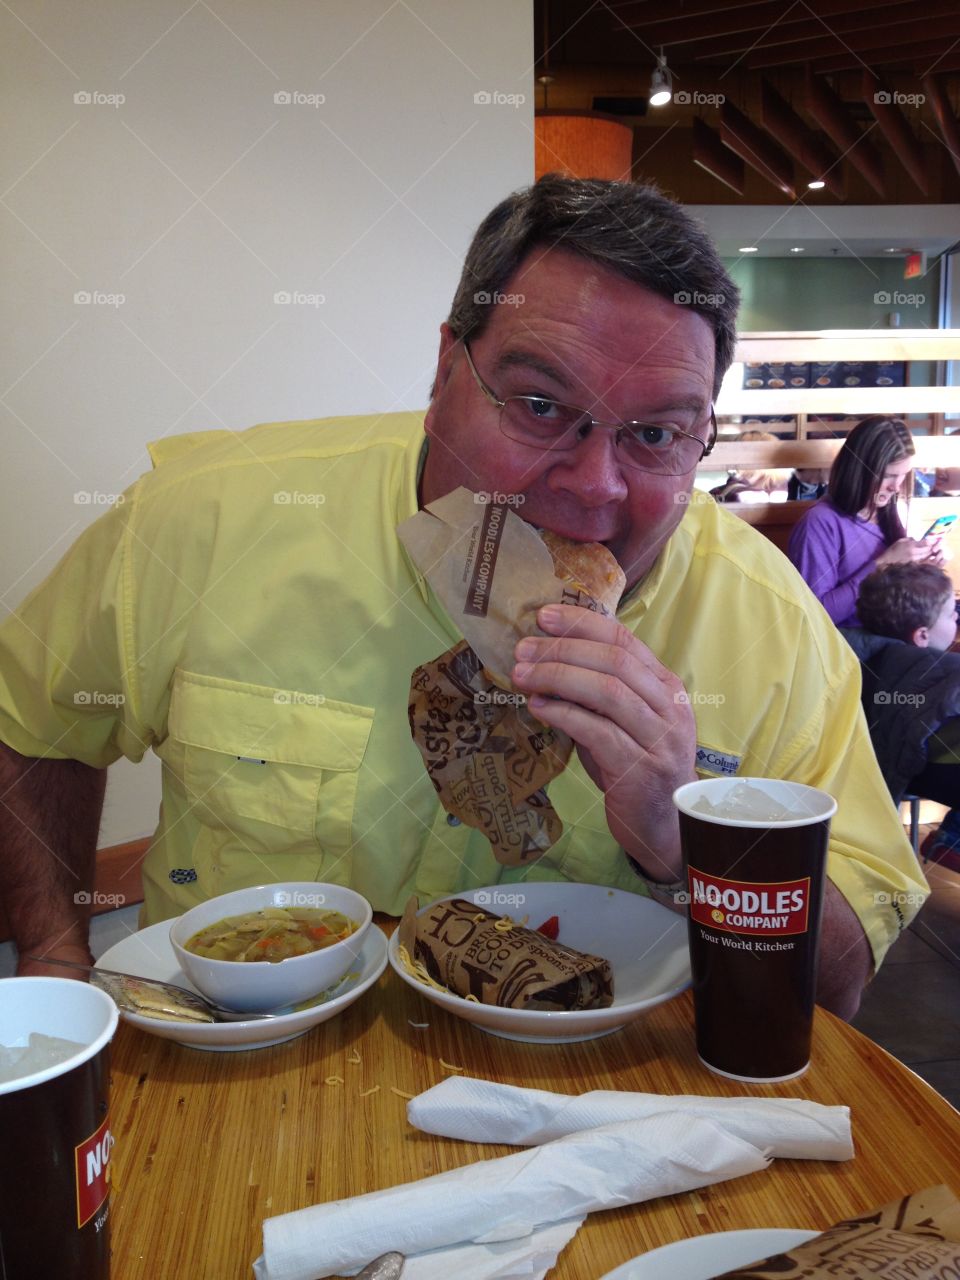 Jeri.mitchell. Enjoying a meal at Noodles and Company. 